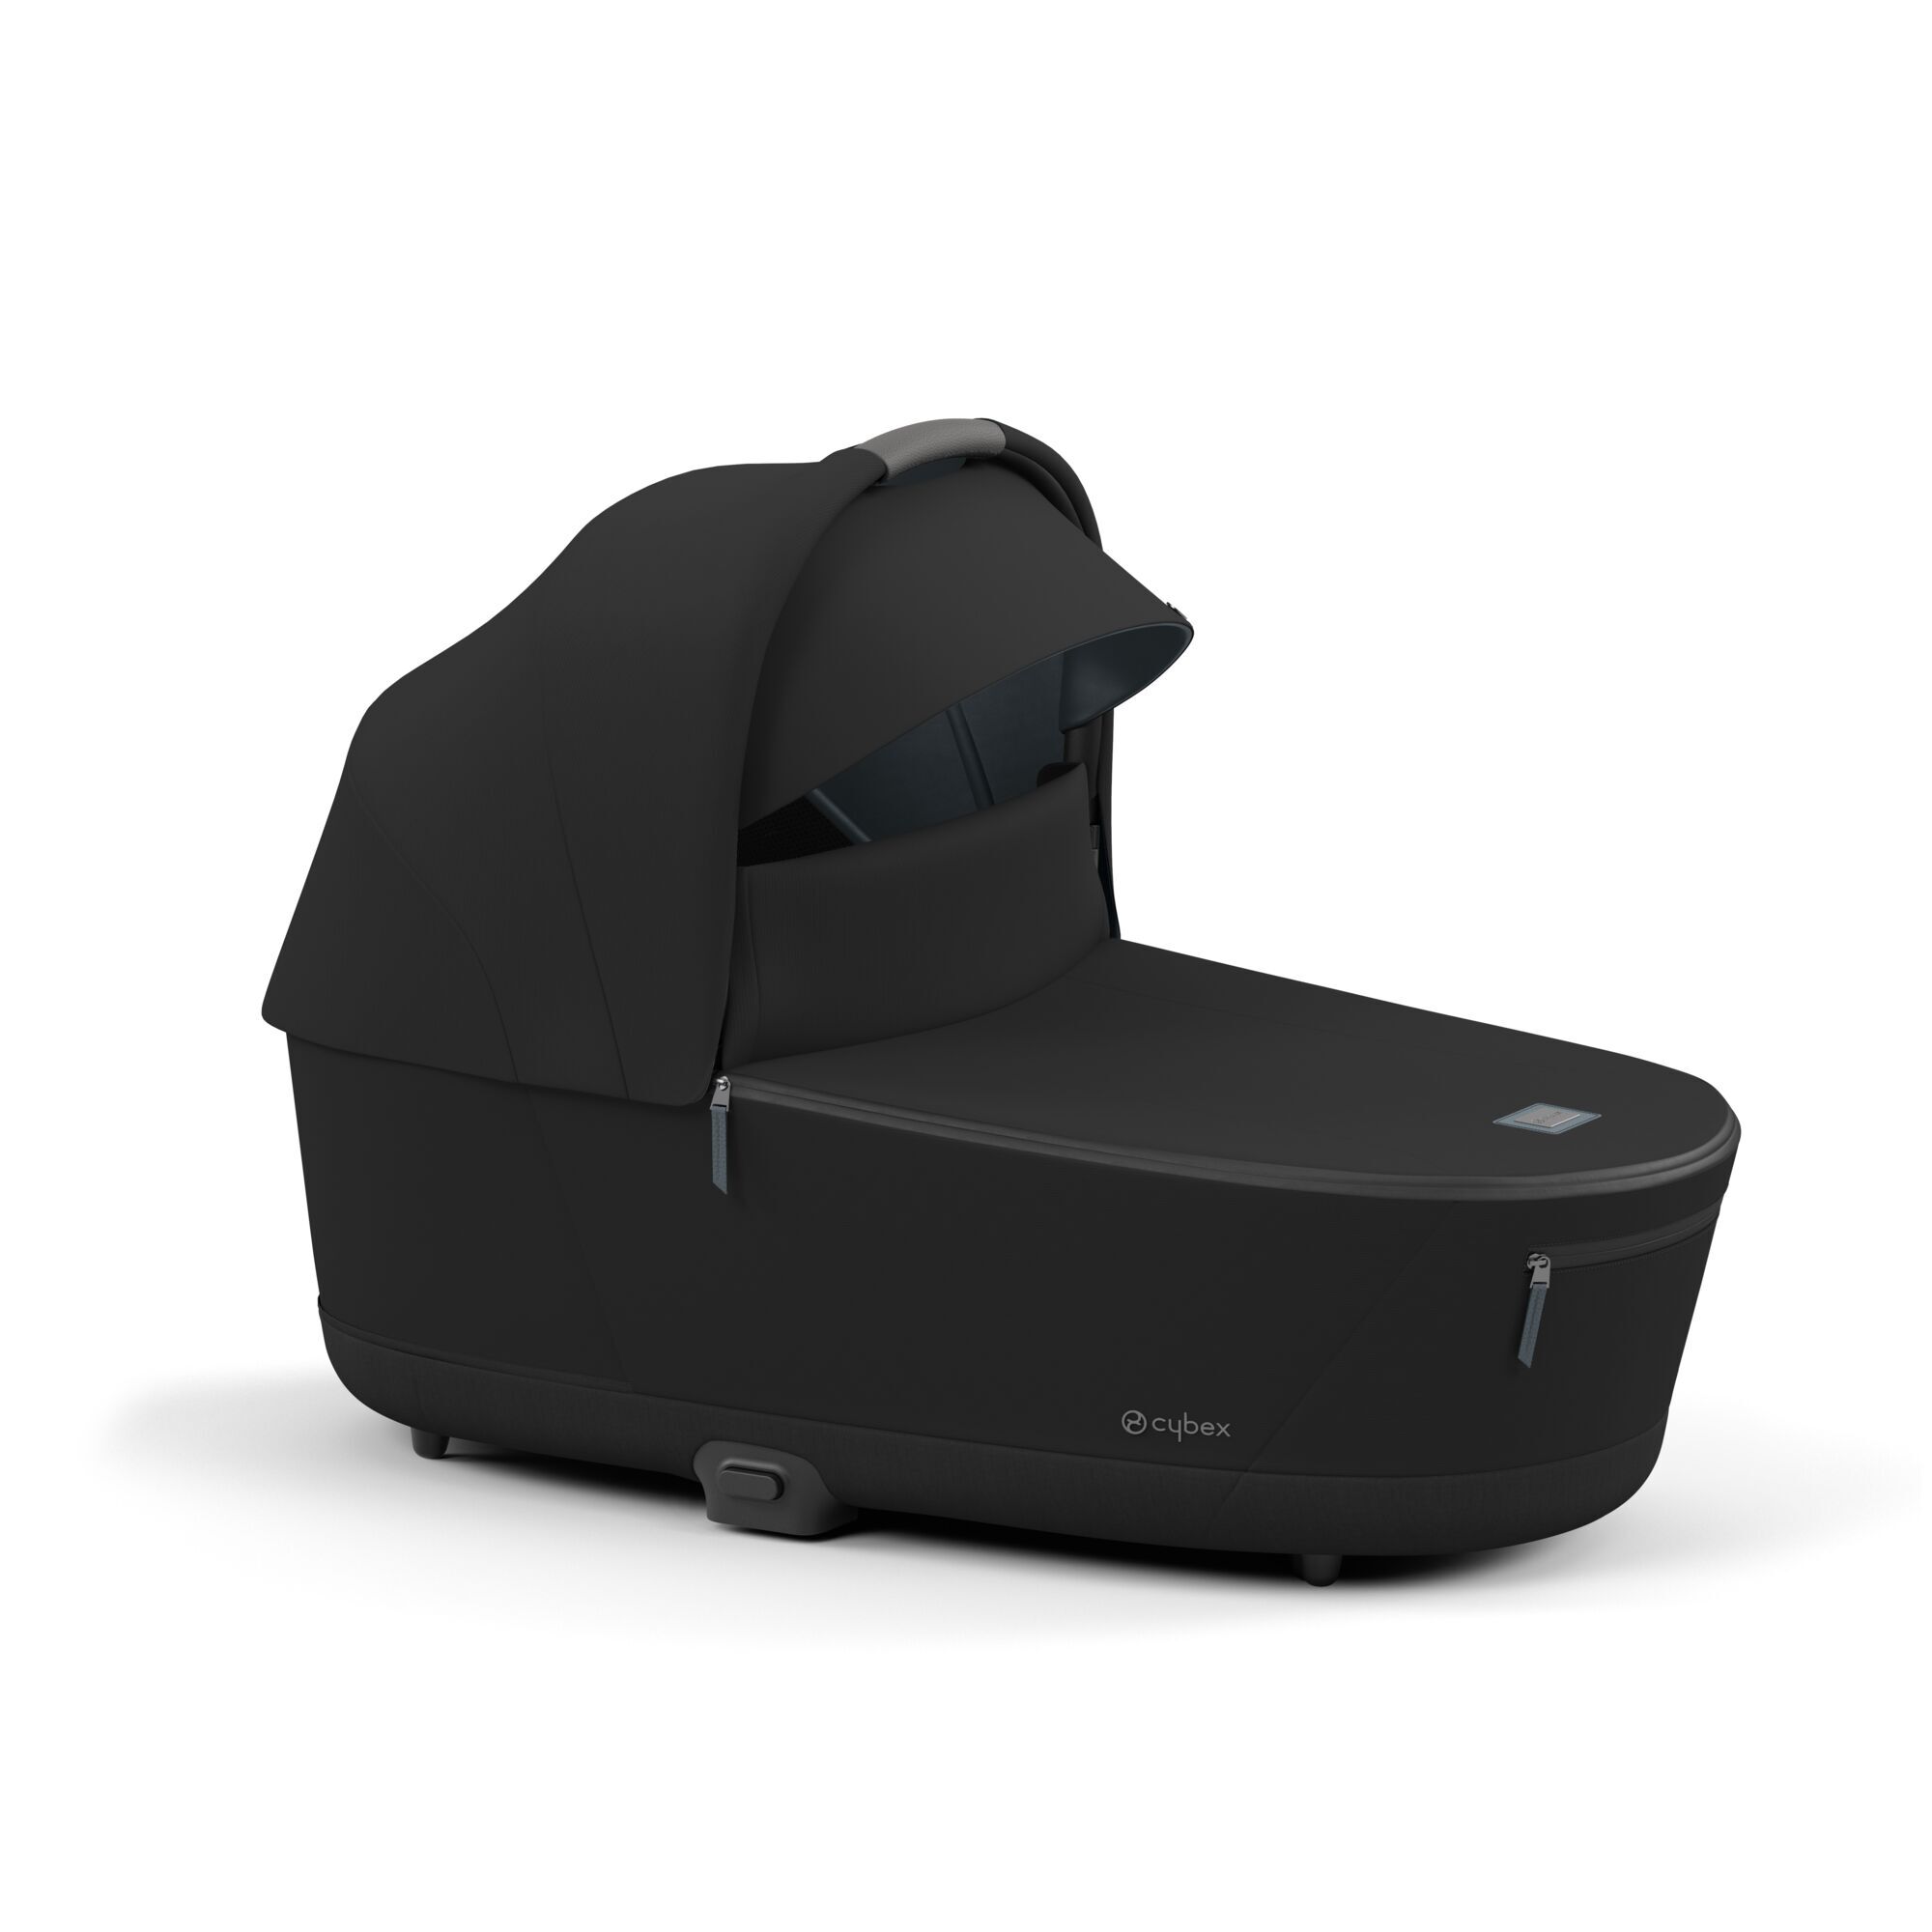 cyb_21_int_-excl_us-_y315_priam_luxcarrycot_dpbl_sunvisor_17c84682033ec970